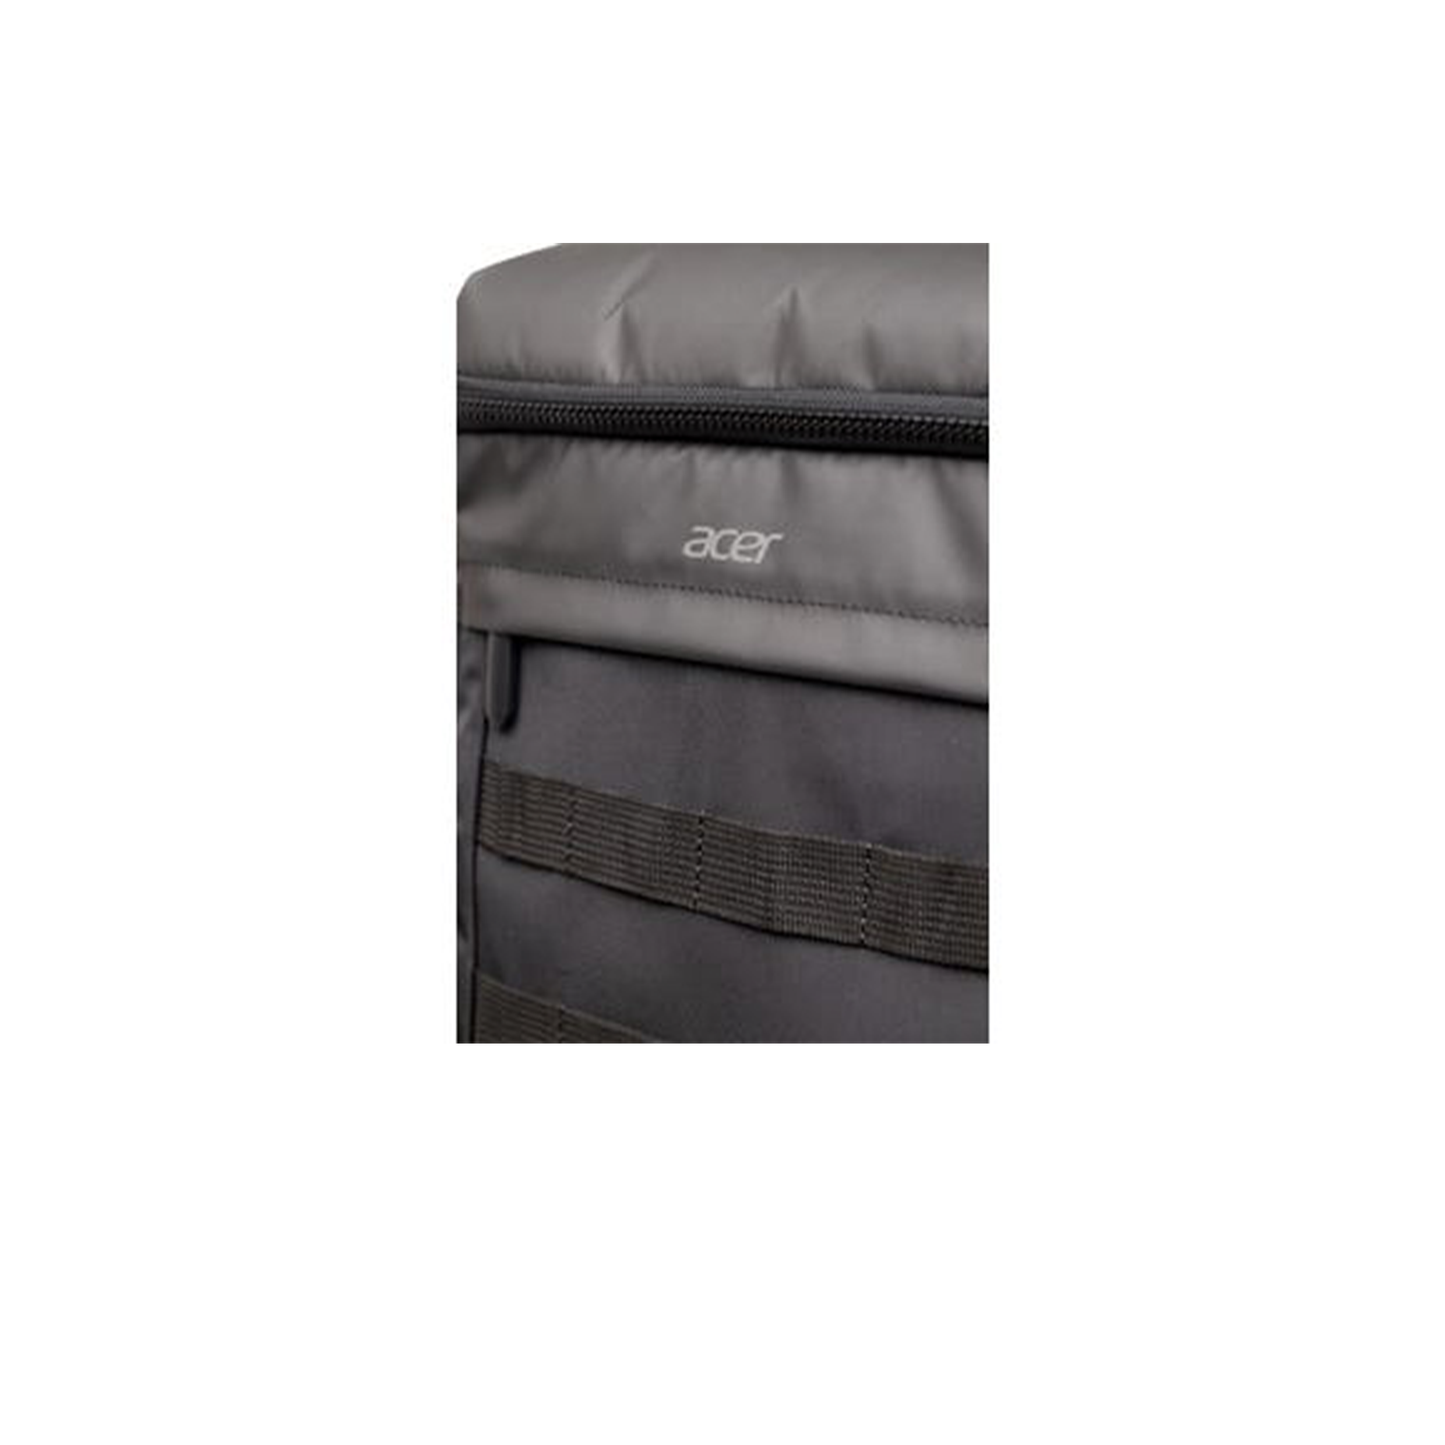 Acer Urban 3in1 Backpack 17"